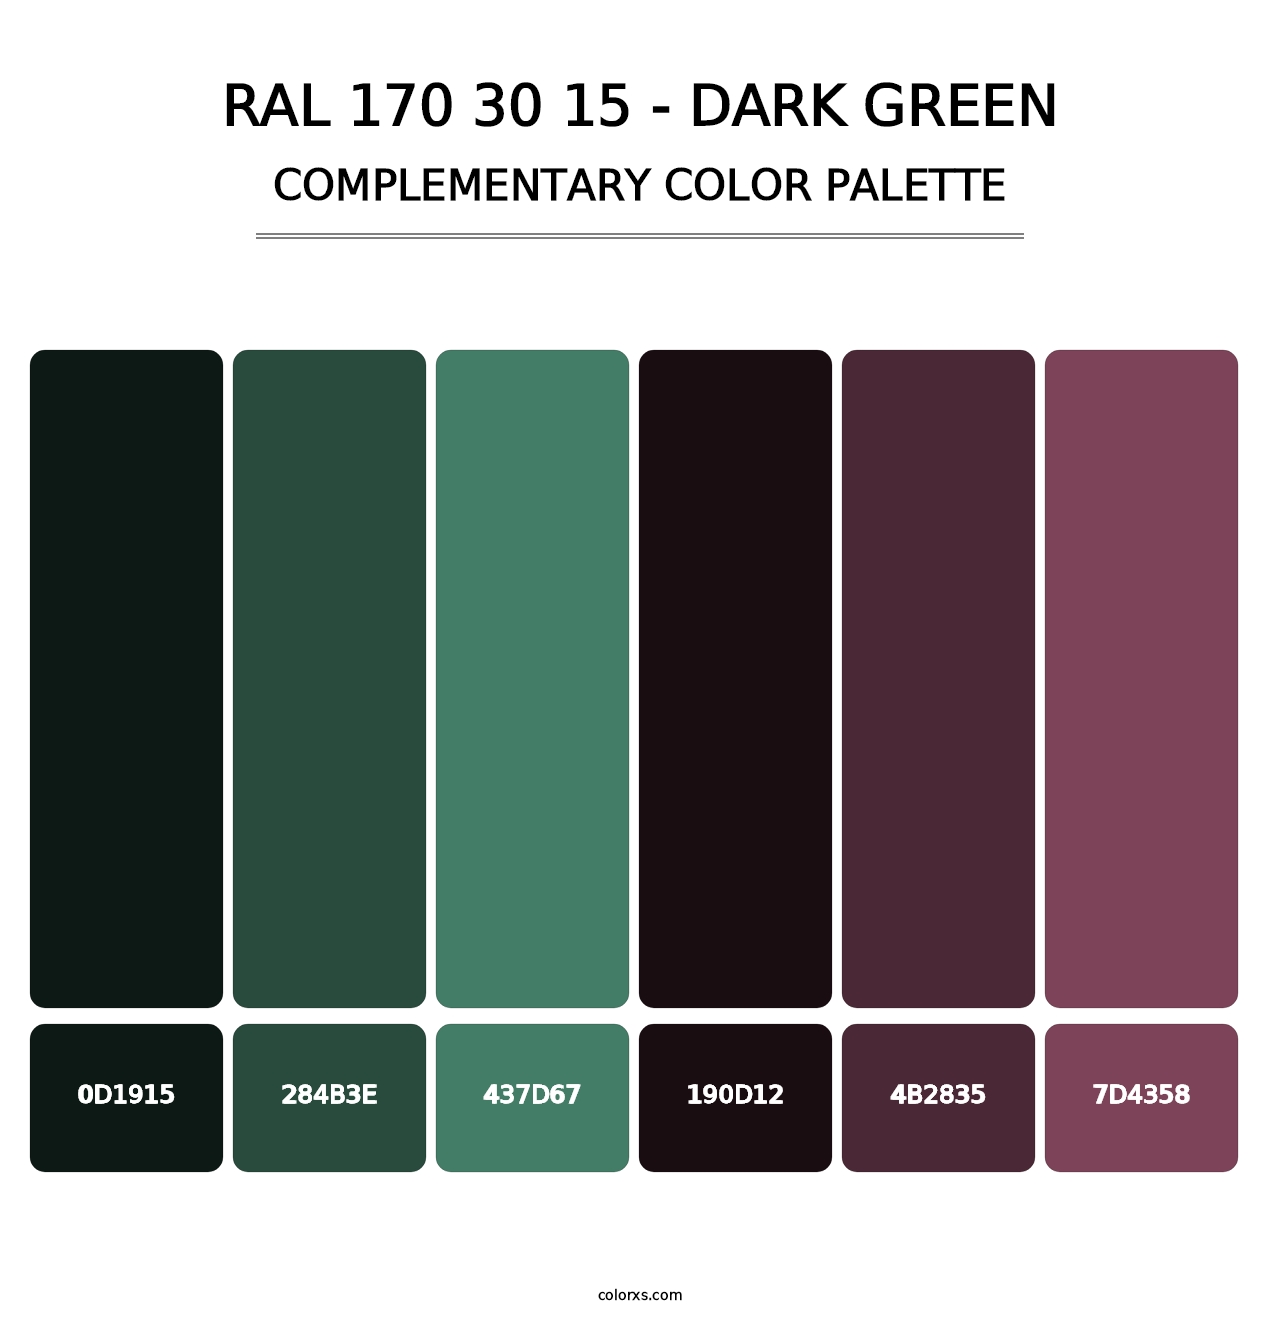 RAL 170 30 15 - Dark Green - Complementary Color Palette